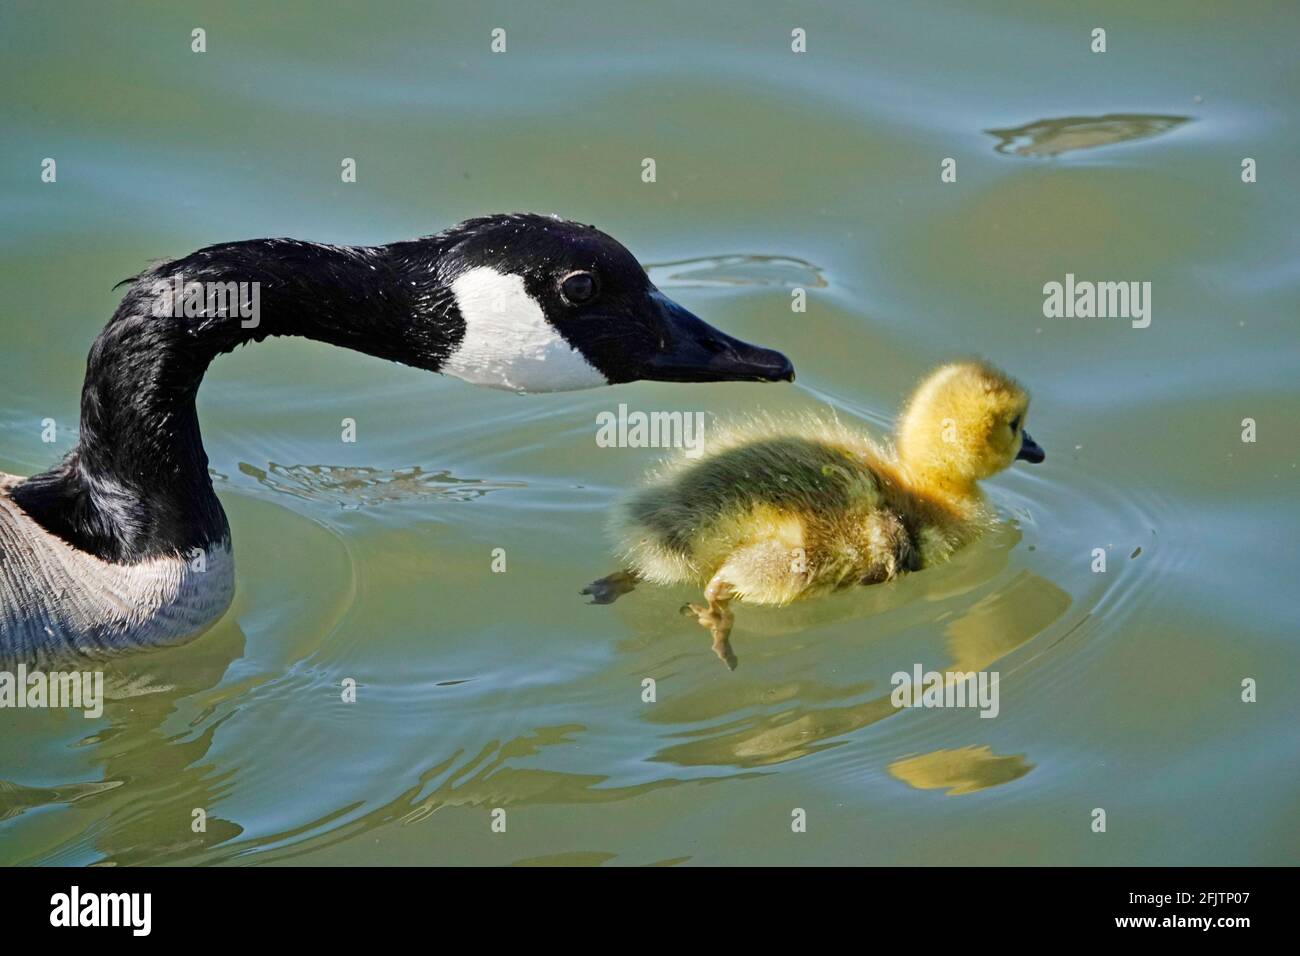 A baby Canada goose or gosling, Branta canadensis, swimming with its mother in April in the Deschutes River, near Bend, Oregon. Stock Photo